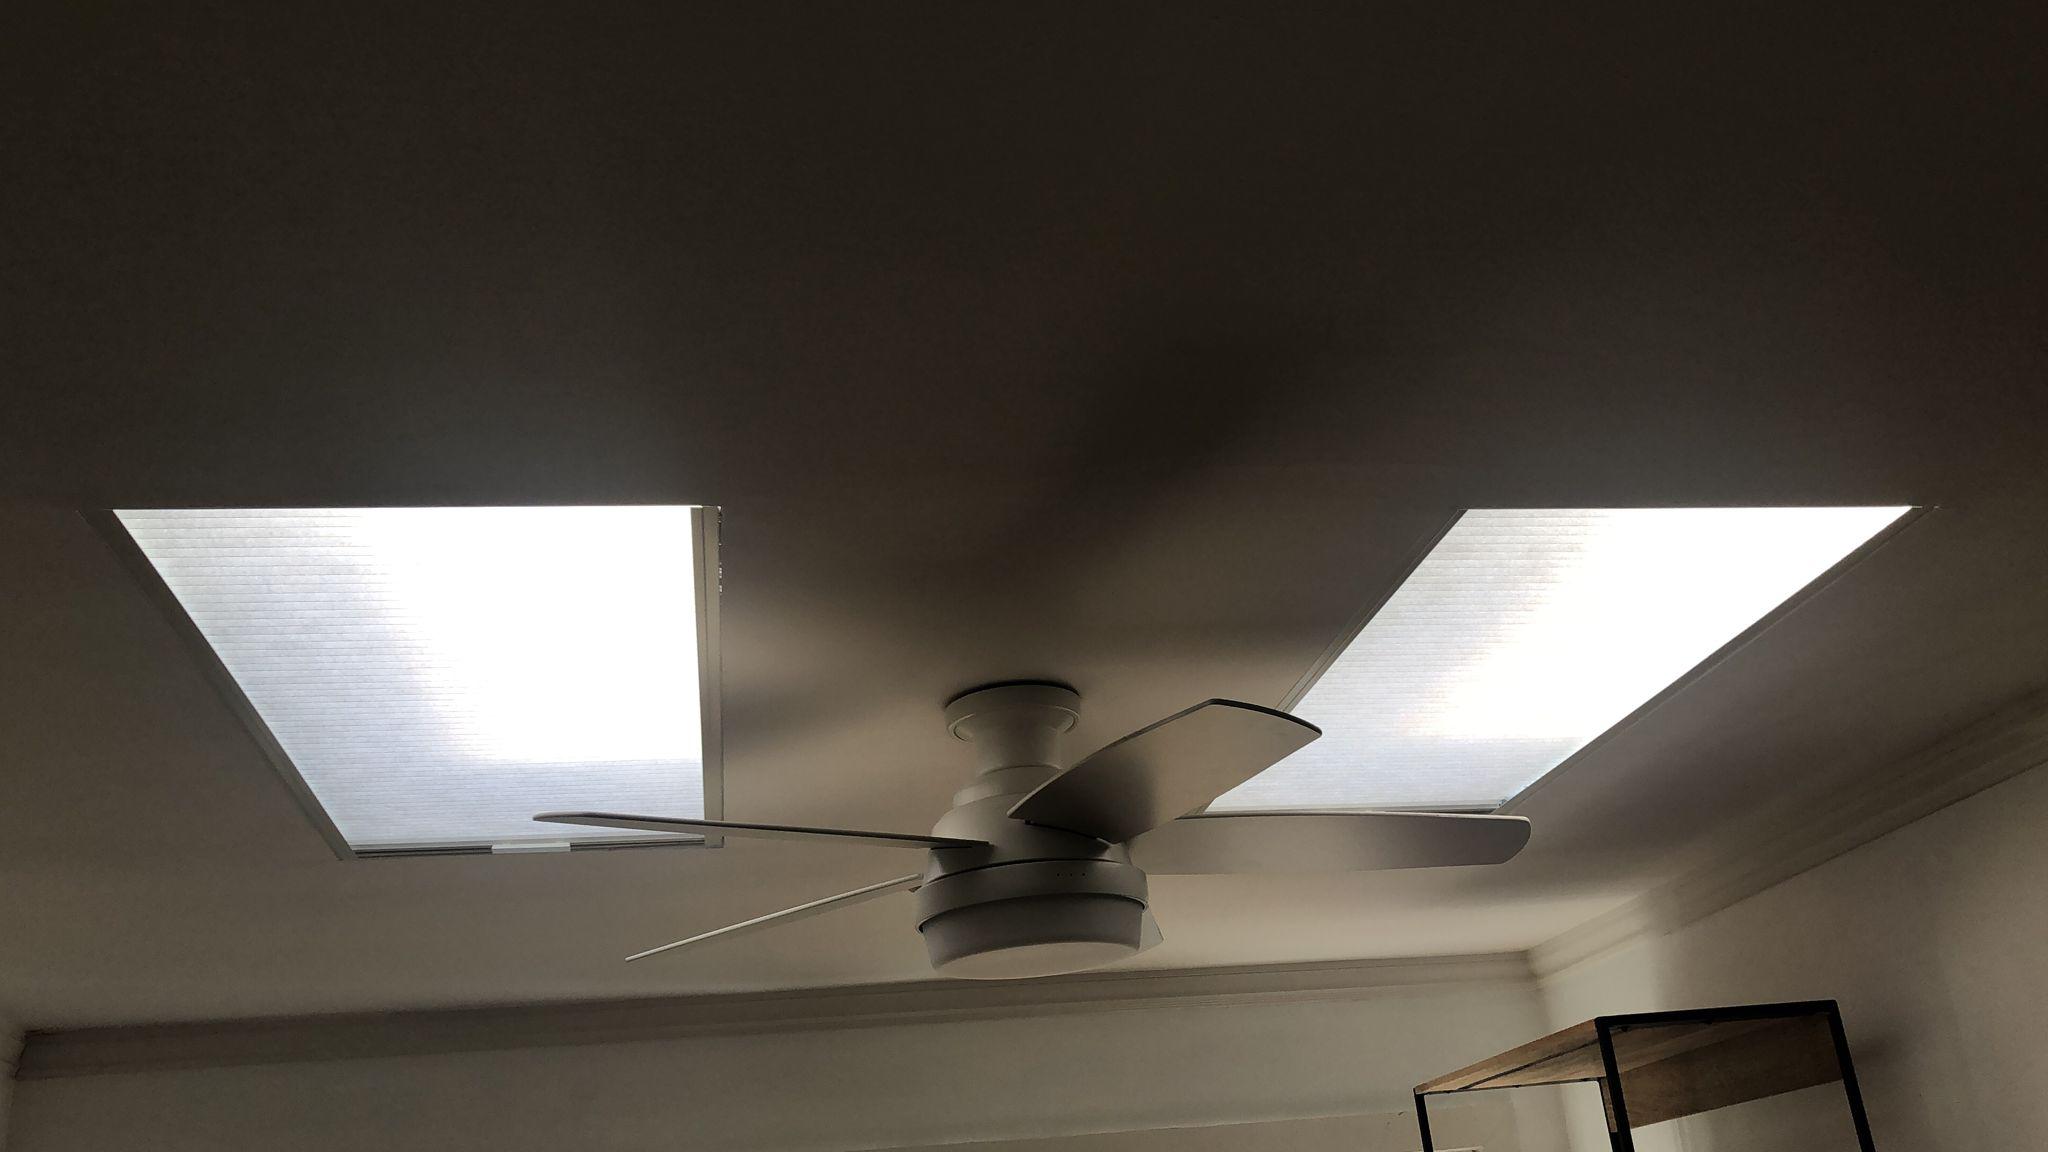 Skylight Shades have a longer service life, easy to open and close, the uniform size of the four-sided metal frame looks better, can be applied to windows in different positions. The smart motor works directly with Alexa, Google Home, and Echo. Satisfy voice control and manual control at the same ti